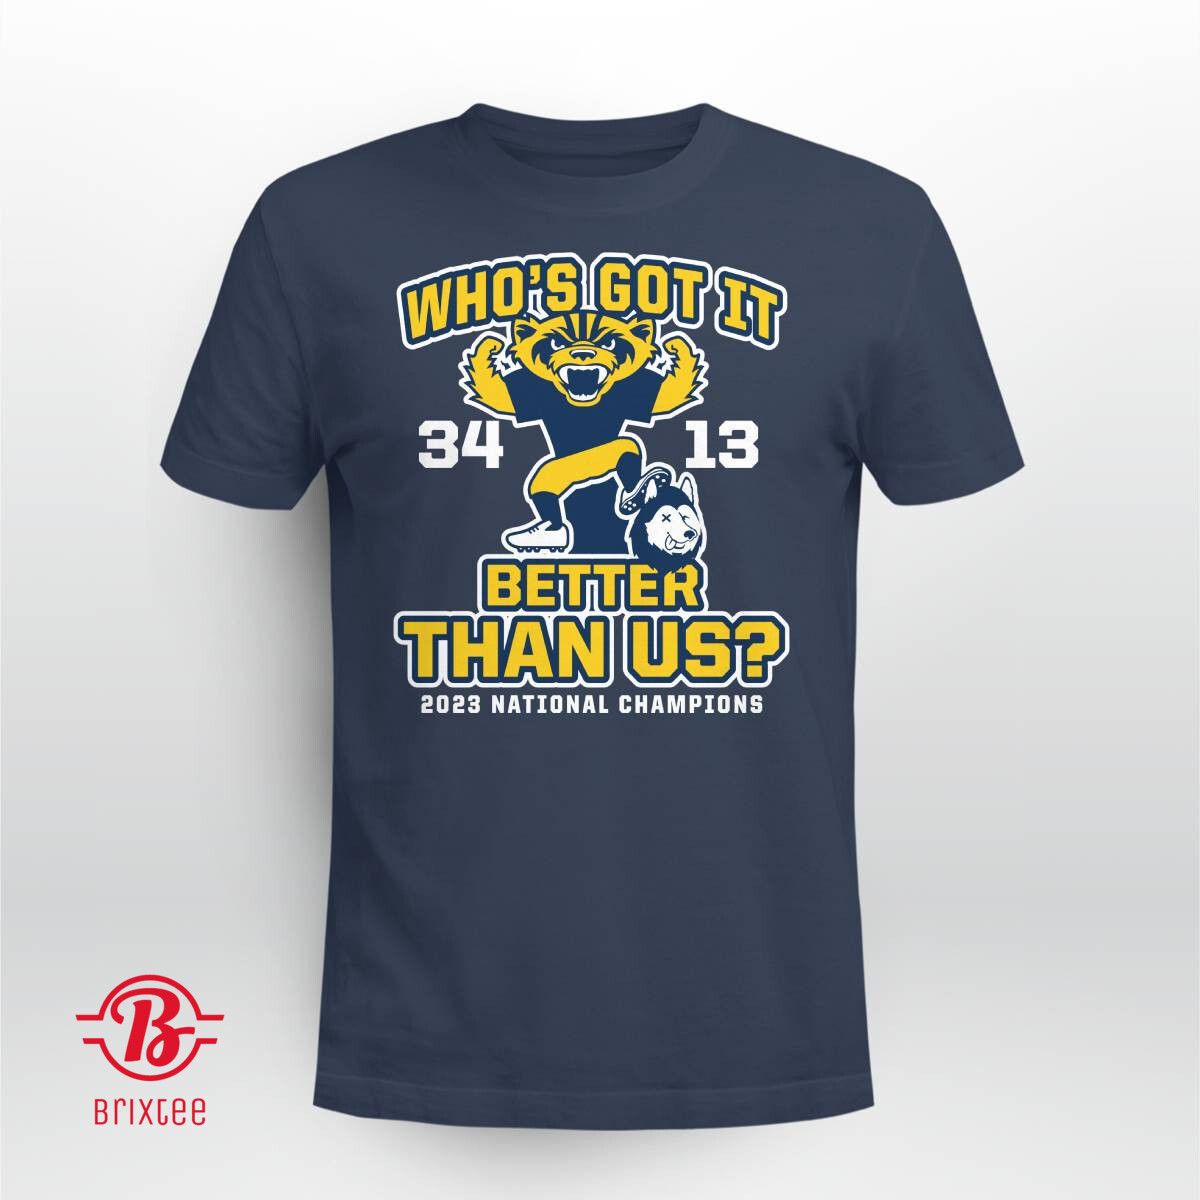 Michigan Wolverines Football Who's Got It Better Than Us? 